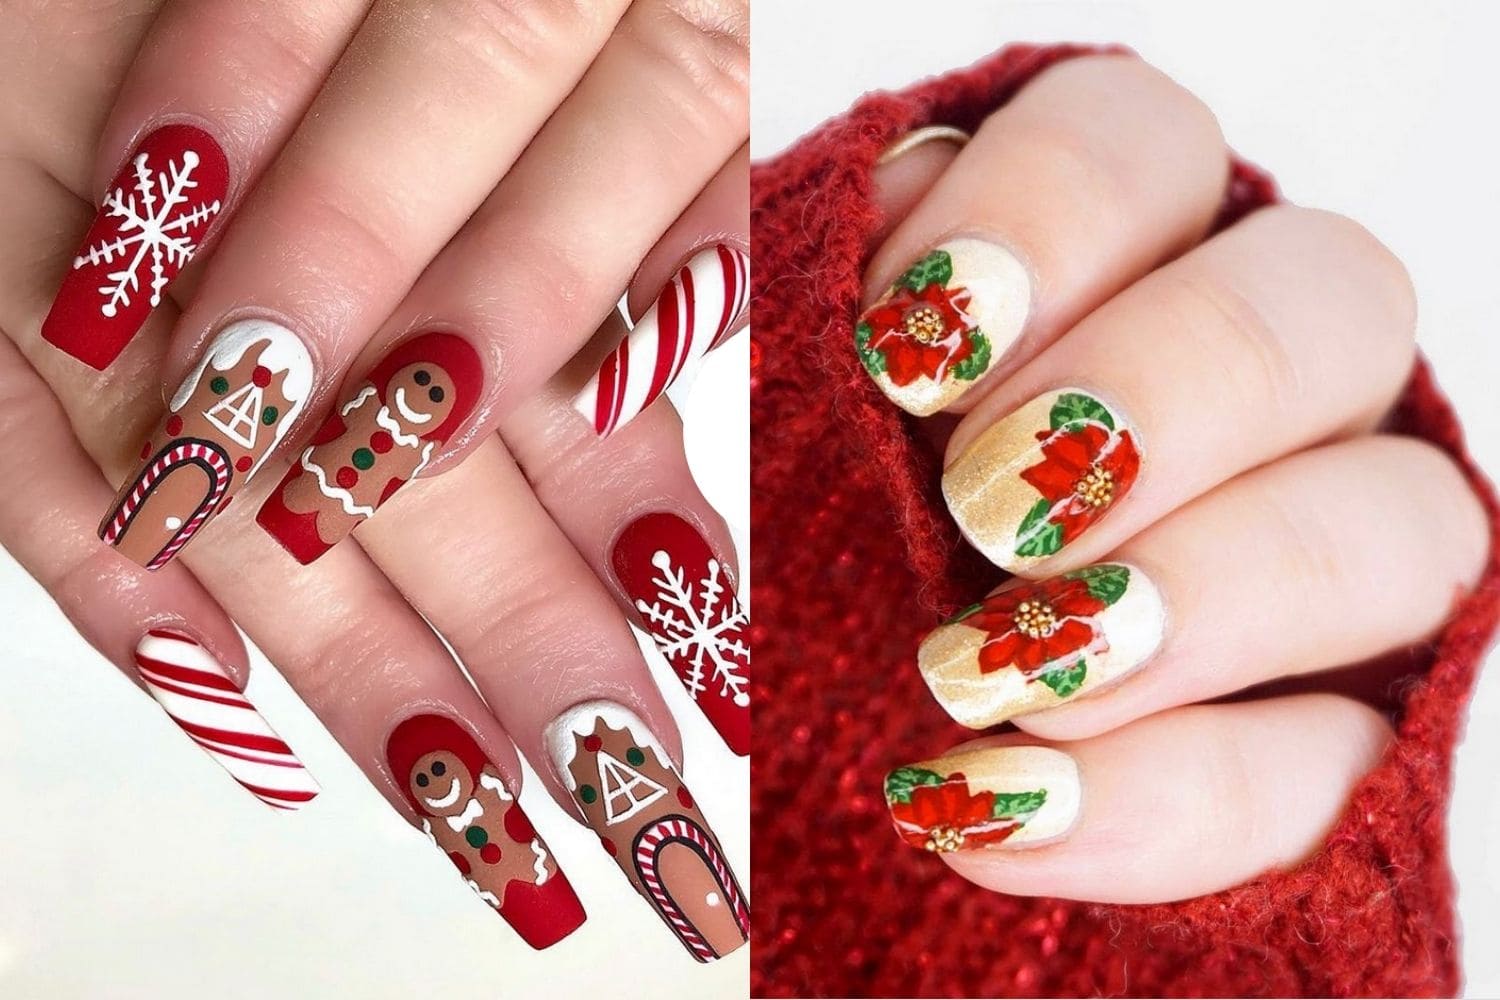 21 Christmas Nail Designs to Spread the Holiday Cheer - Let's Eat Cake